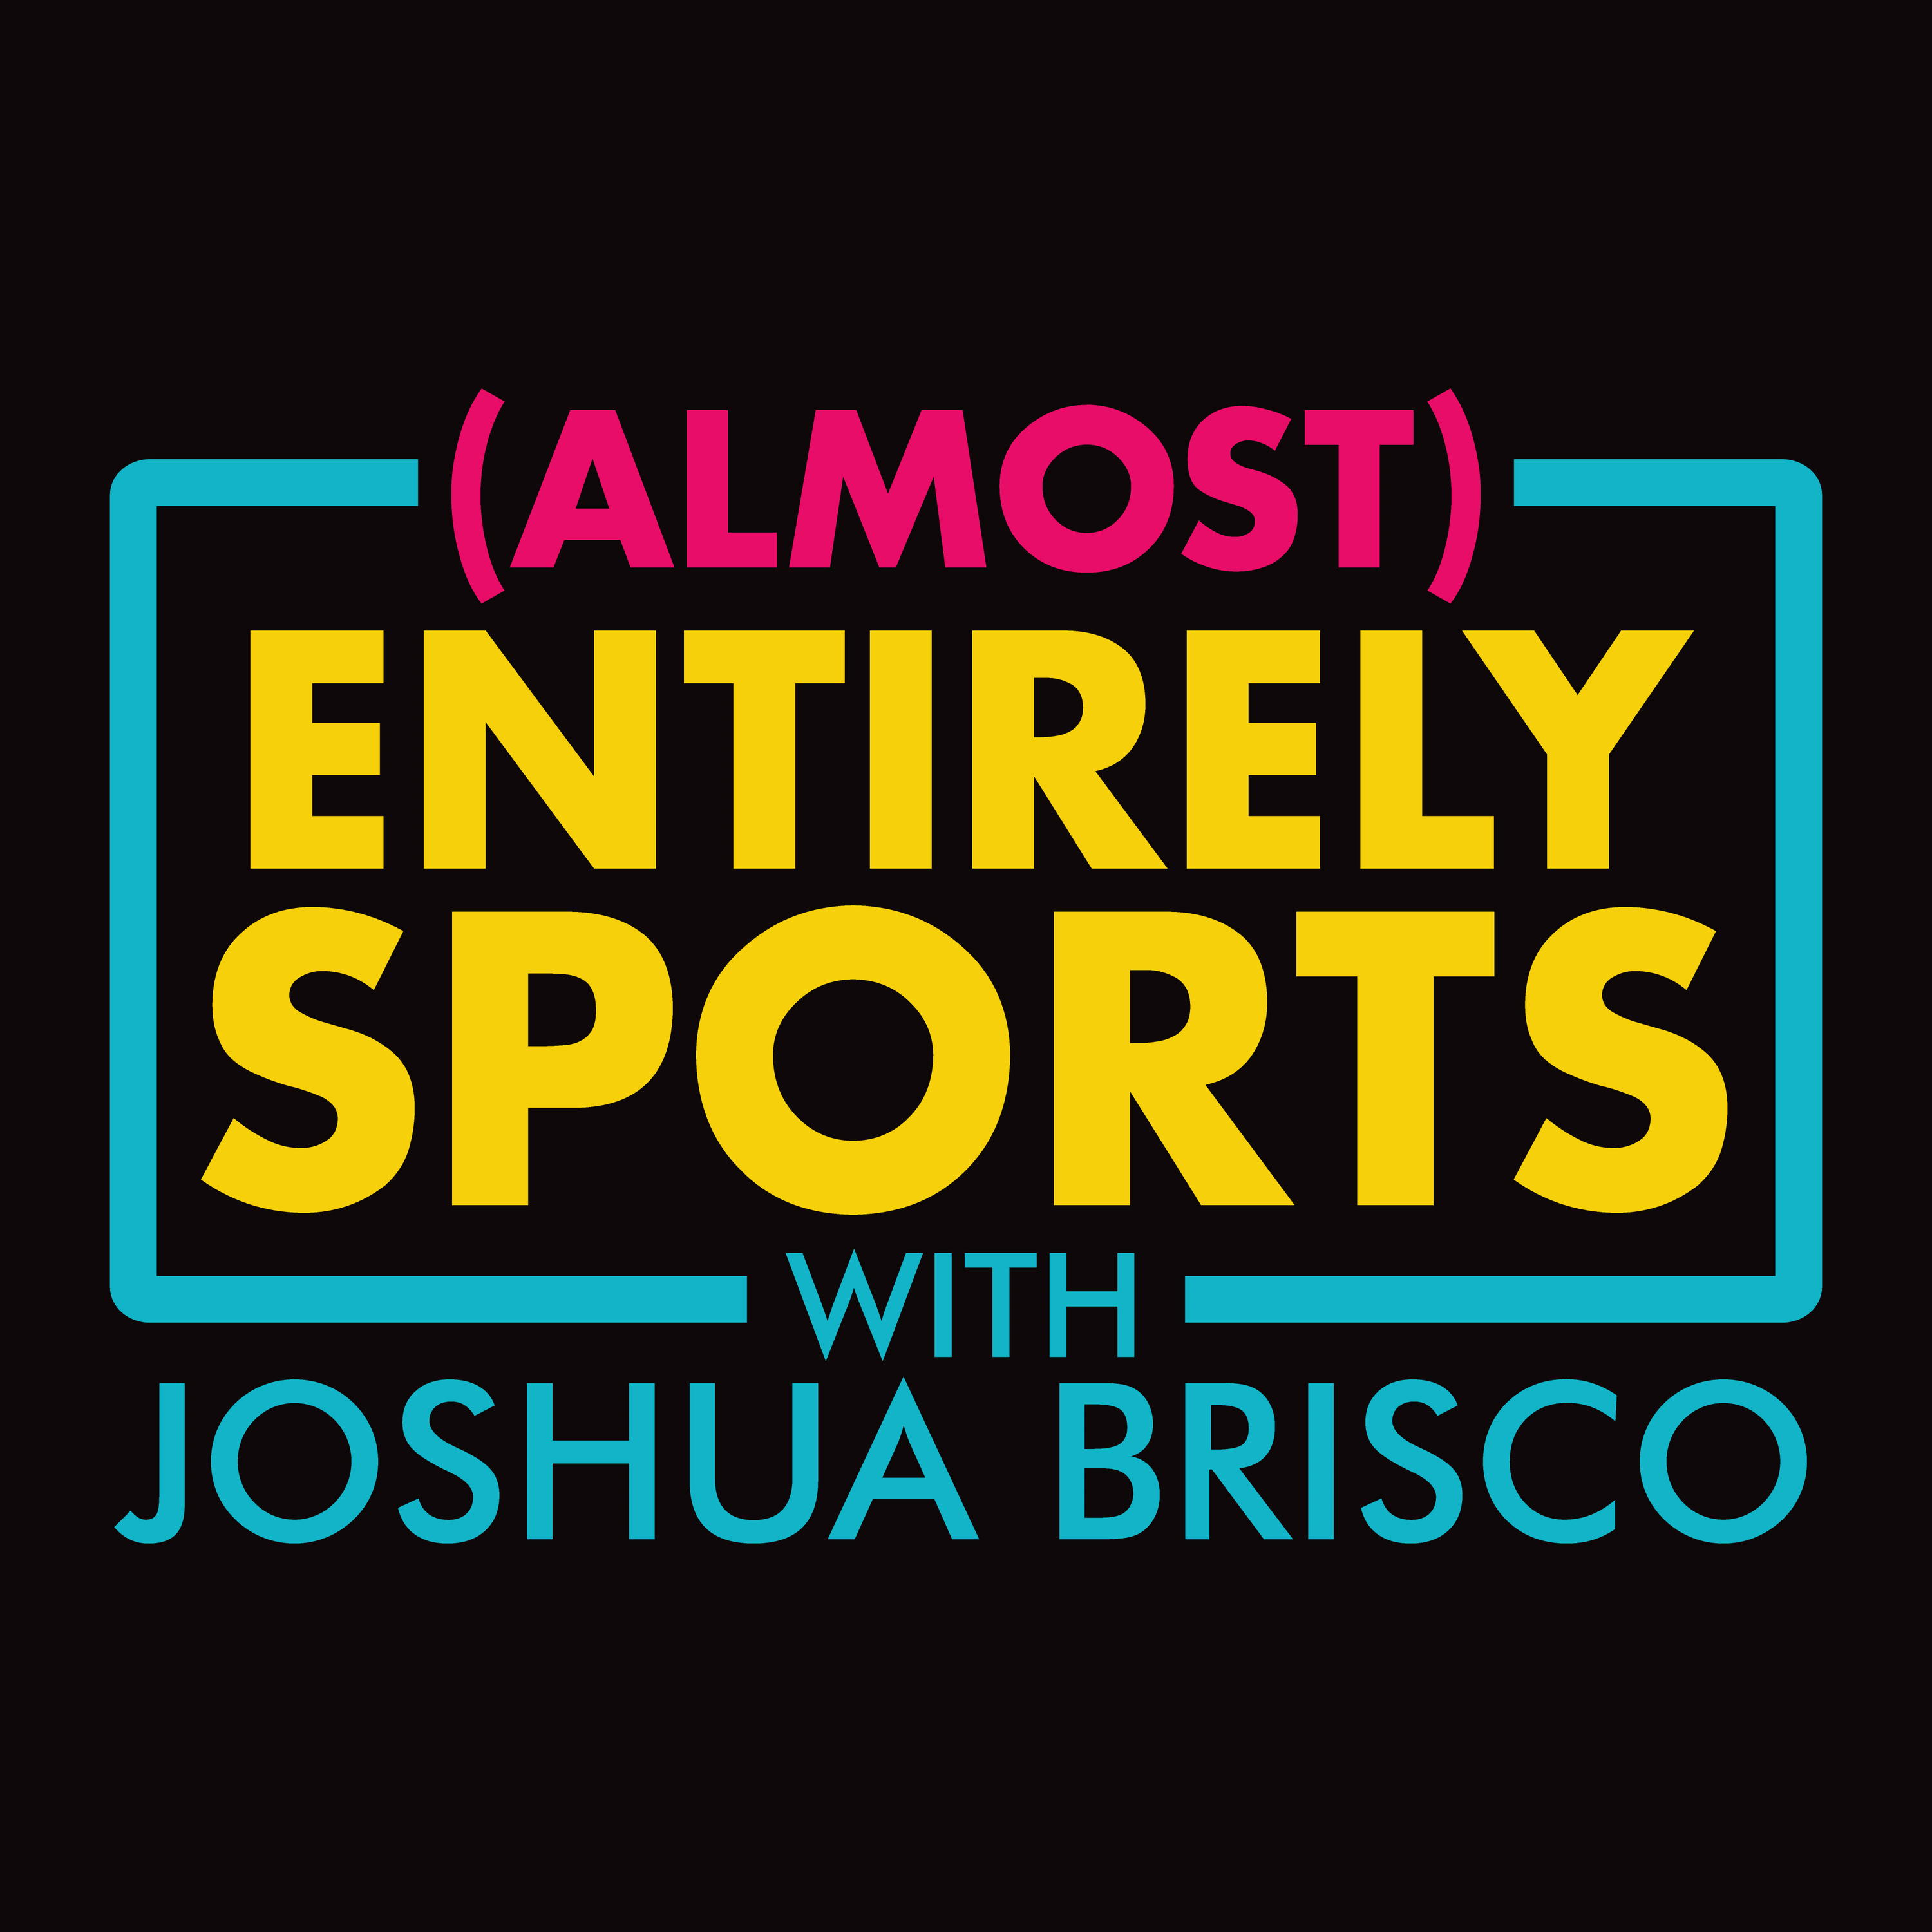 AES: Jay Soderberg brings the Patriots perspective, 1/18/2019